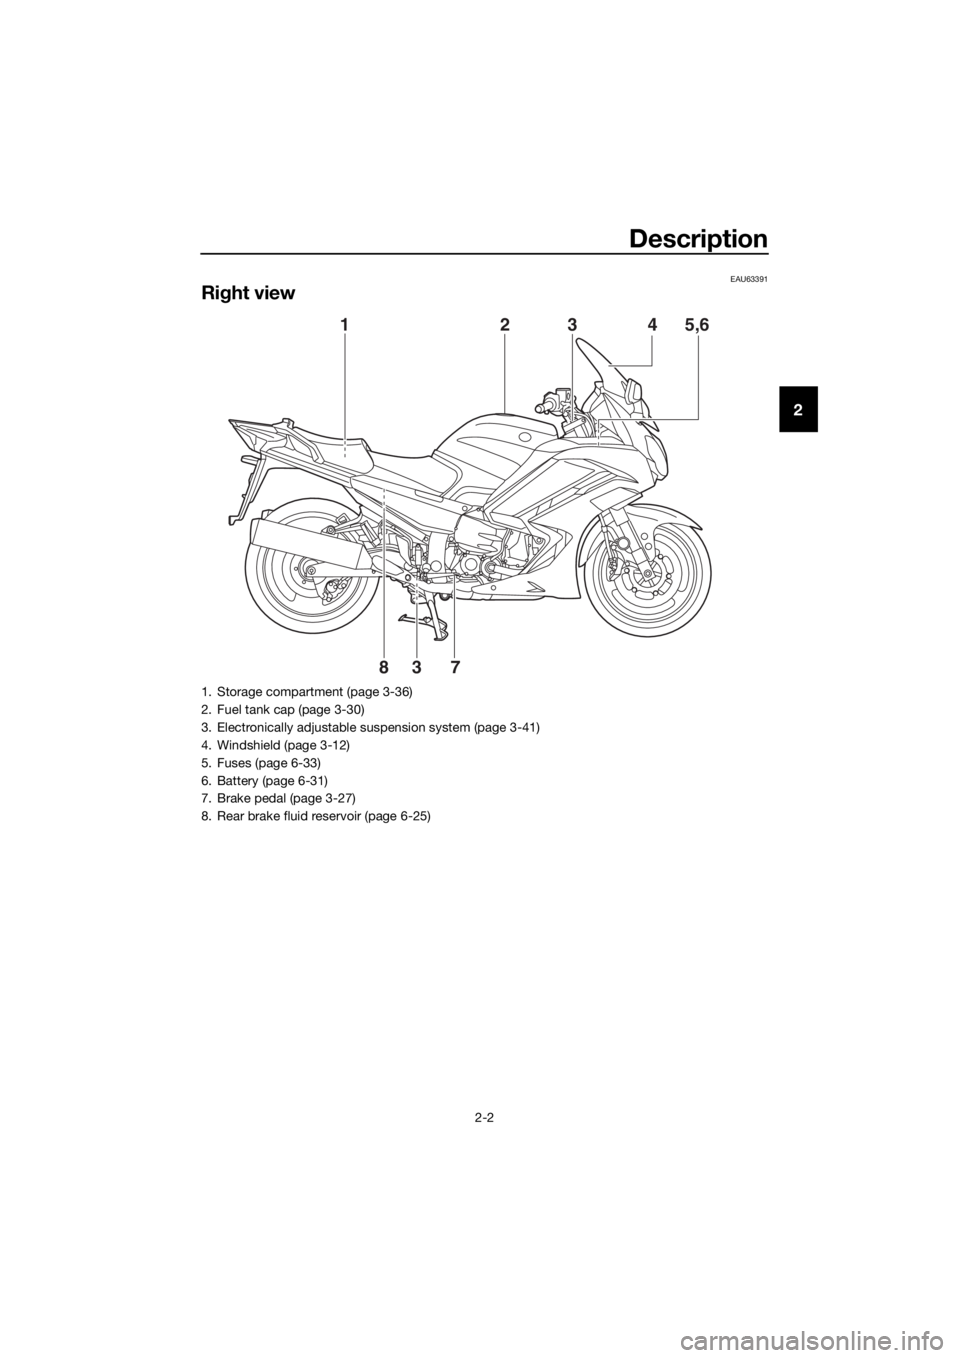 YAMAHA FJR1300AS 2020  Owners Manual Description
2-2
2
EAU63391
Right view
78 5,6
4
23
1
3
1. Storage compartment (page 3-36)
2. Fuel tank cap (page 3-30)
3. Electronically adjustable suspension system (page 3-41)
4. Windshield (page 3-1